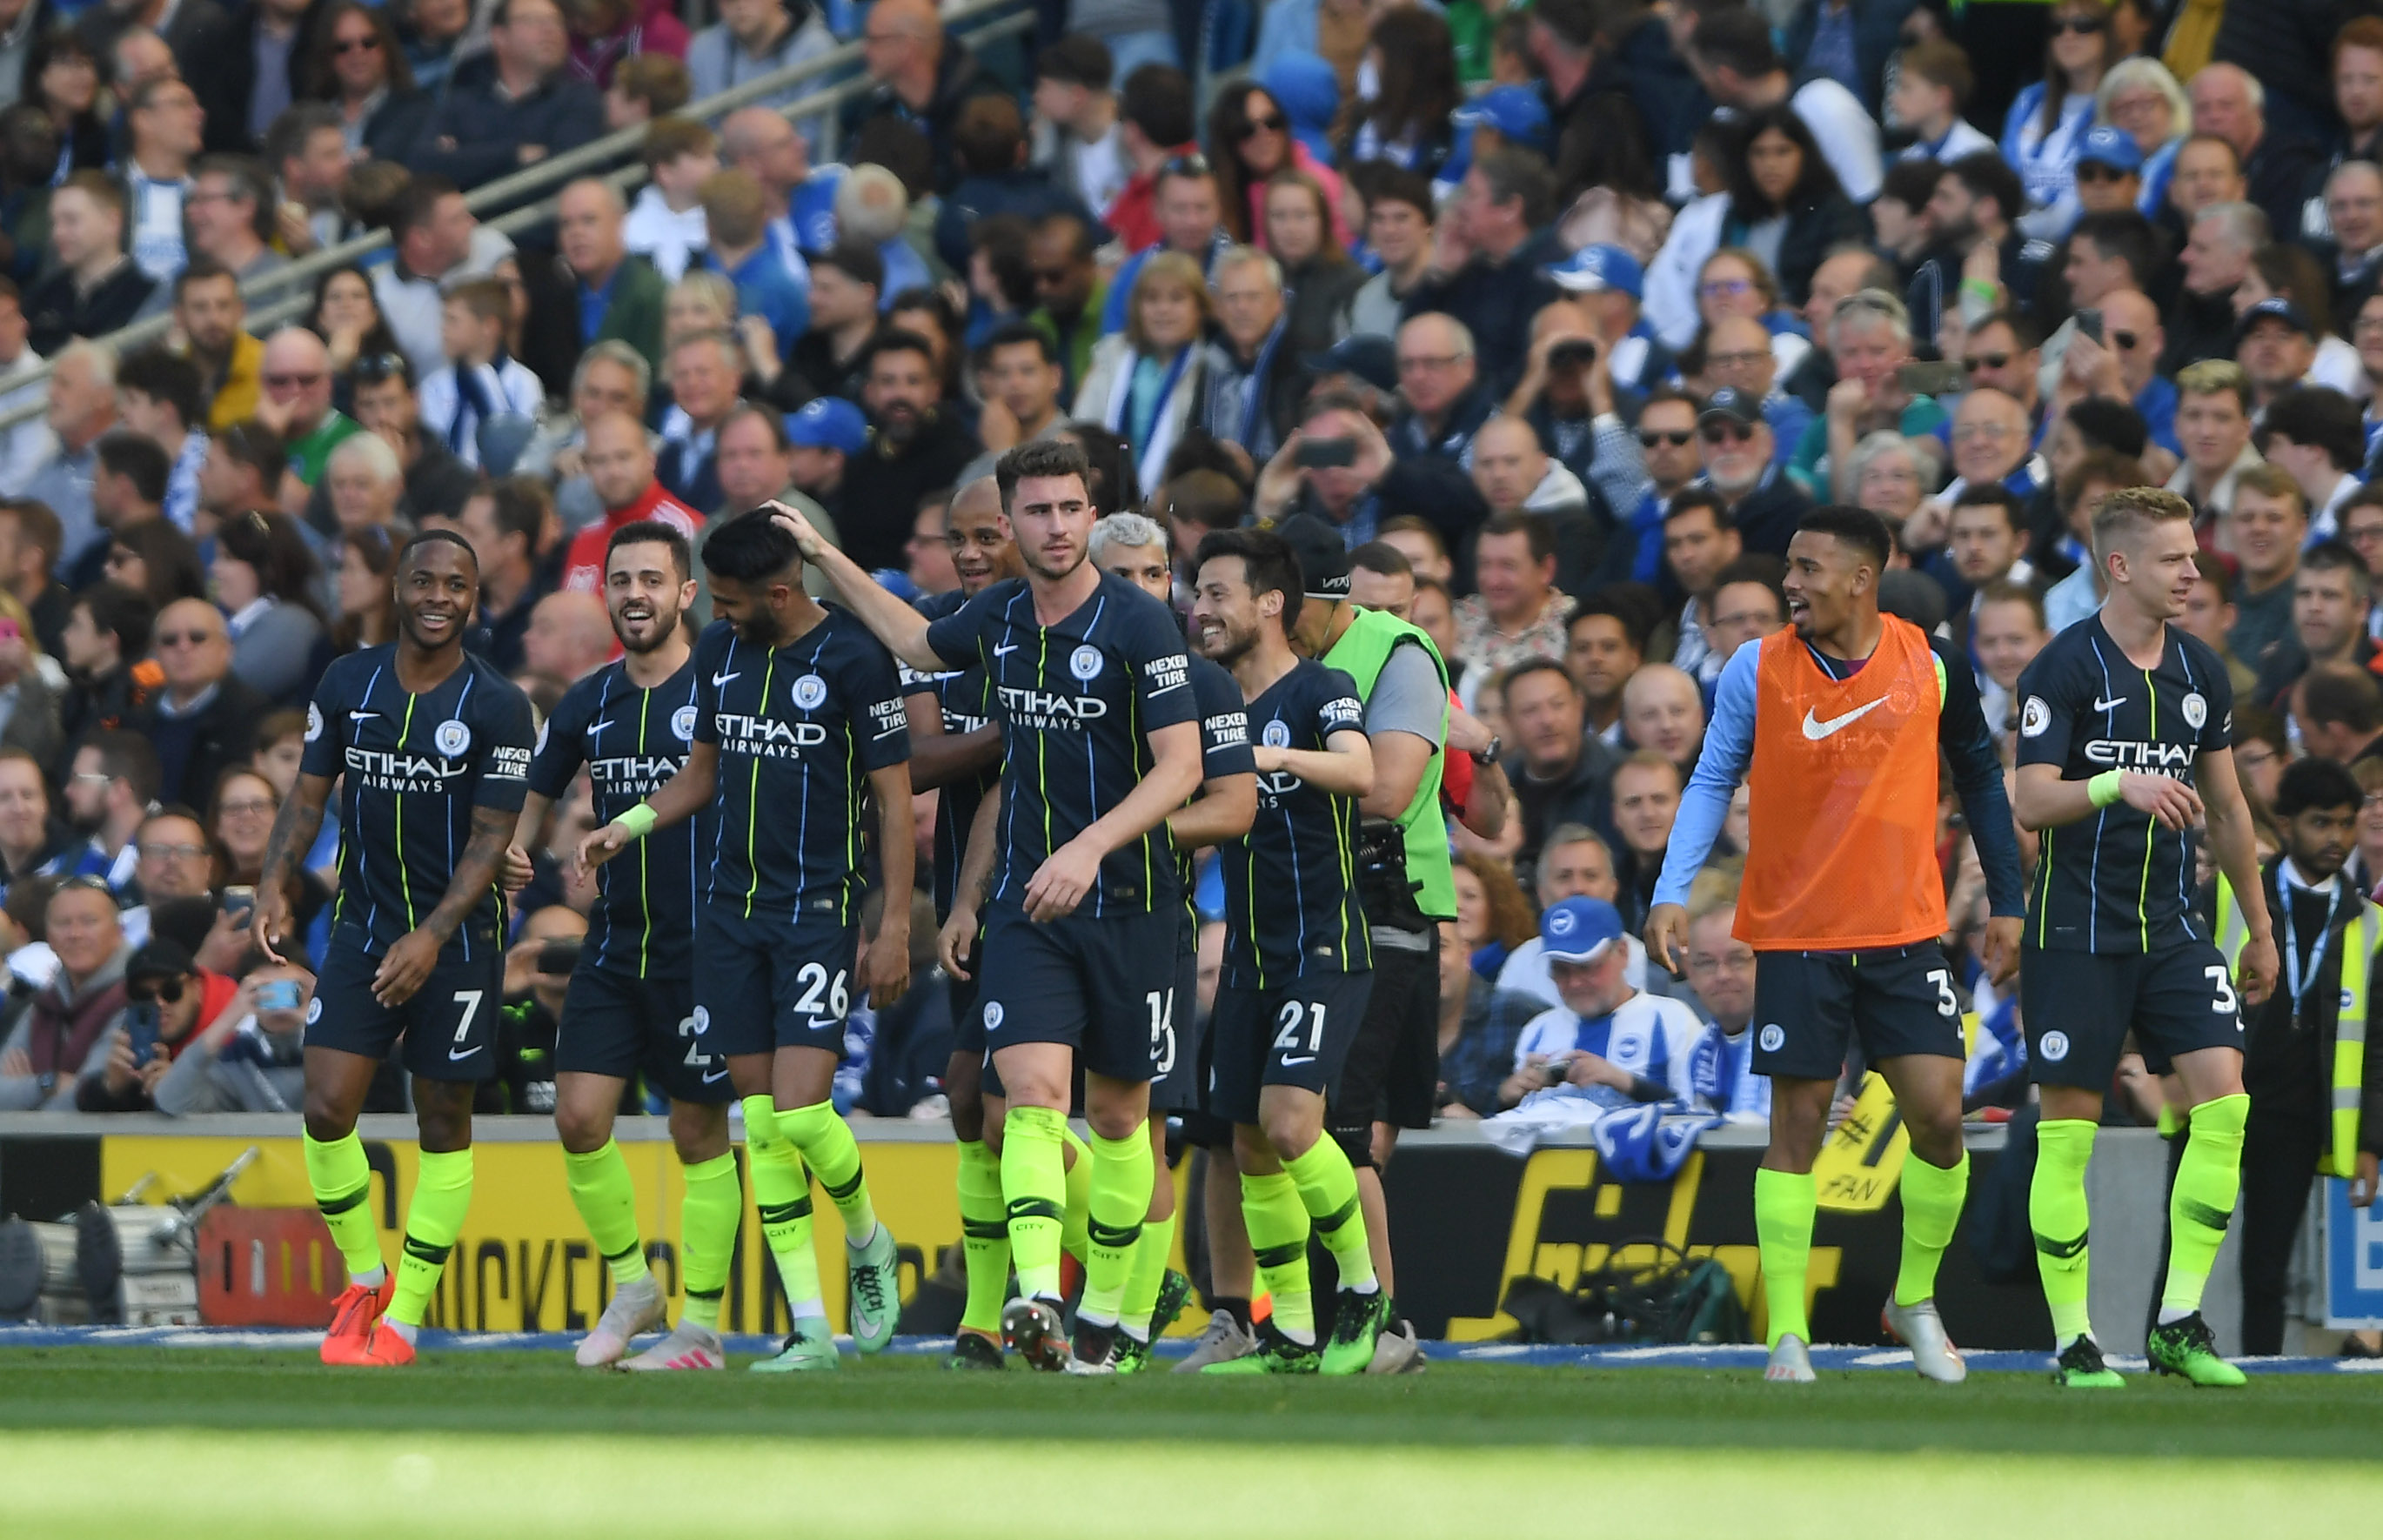 BRIGHTON, ENGLAND - MAY 12: Riyad Mahrez of Manchester City celebrates with teammates after scoring his team's third goal during the Premier League match between Brighton & Hove Albion and Manchester City at American Express Community Stadium on May 12, 2019 in Brighton, United Kingdom. (Photo by Mike Hewitt/Getty Images)